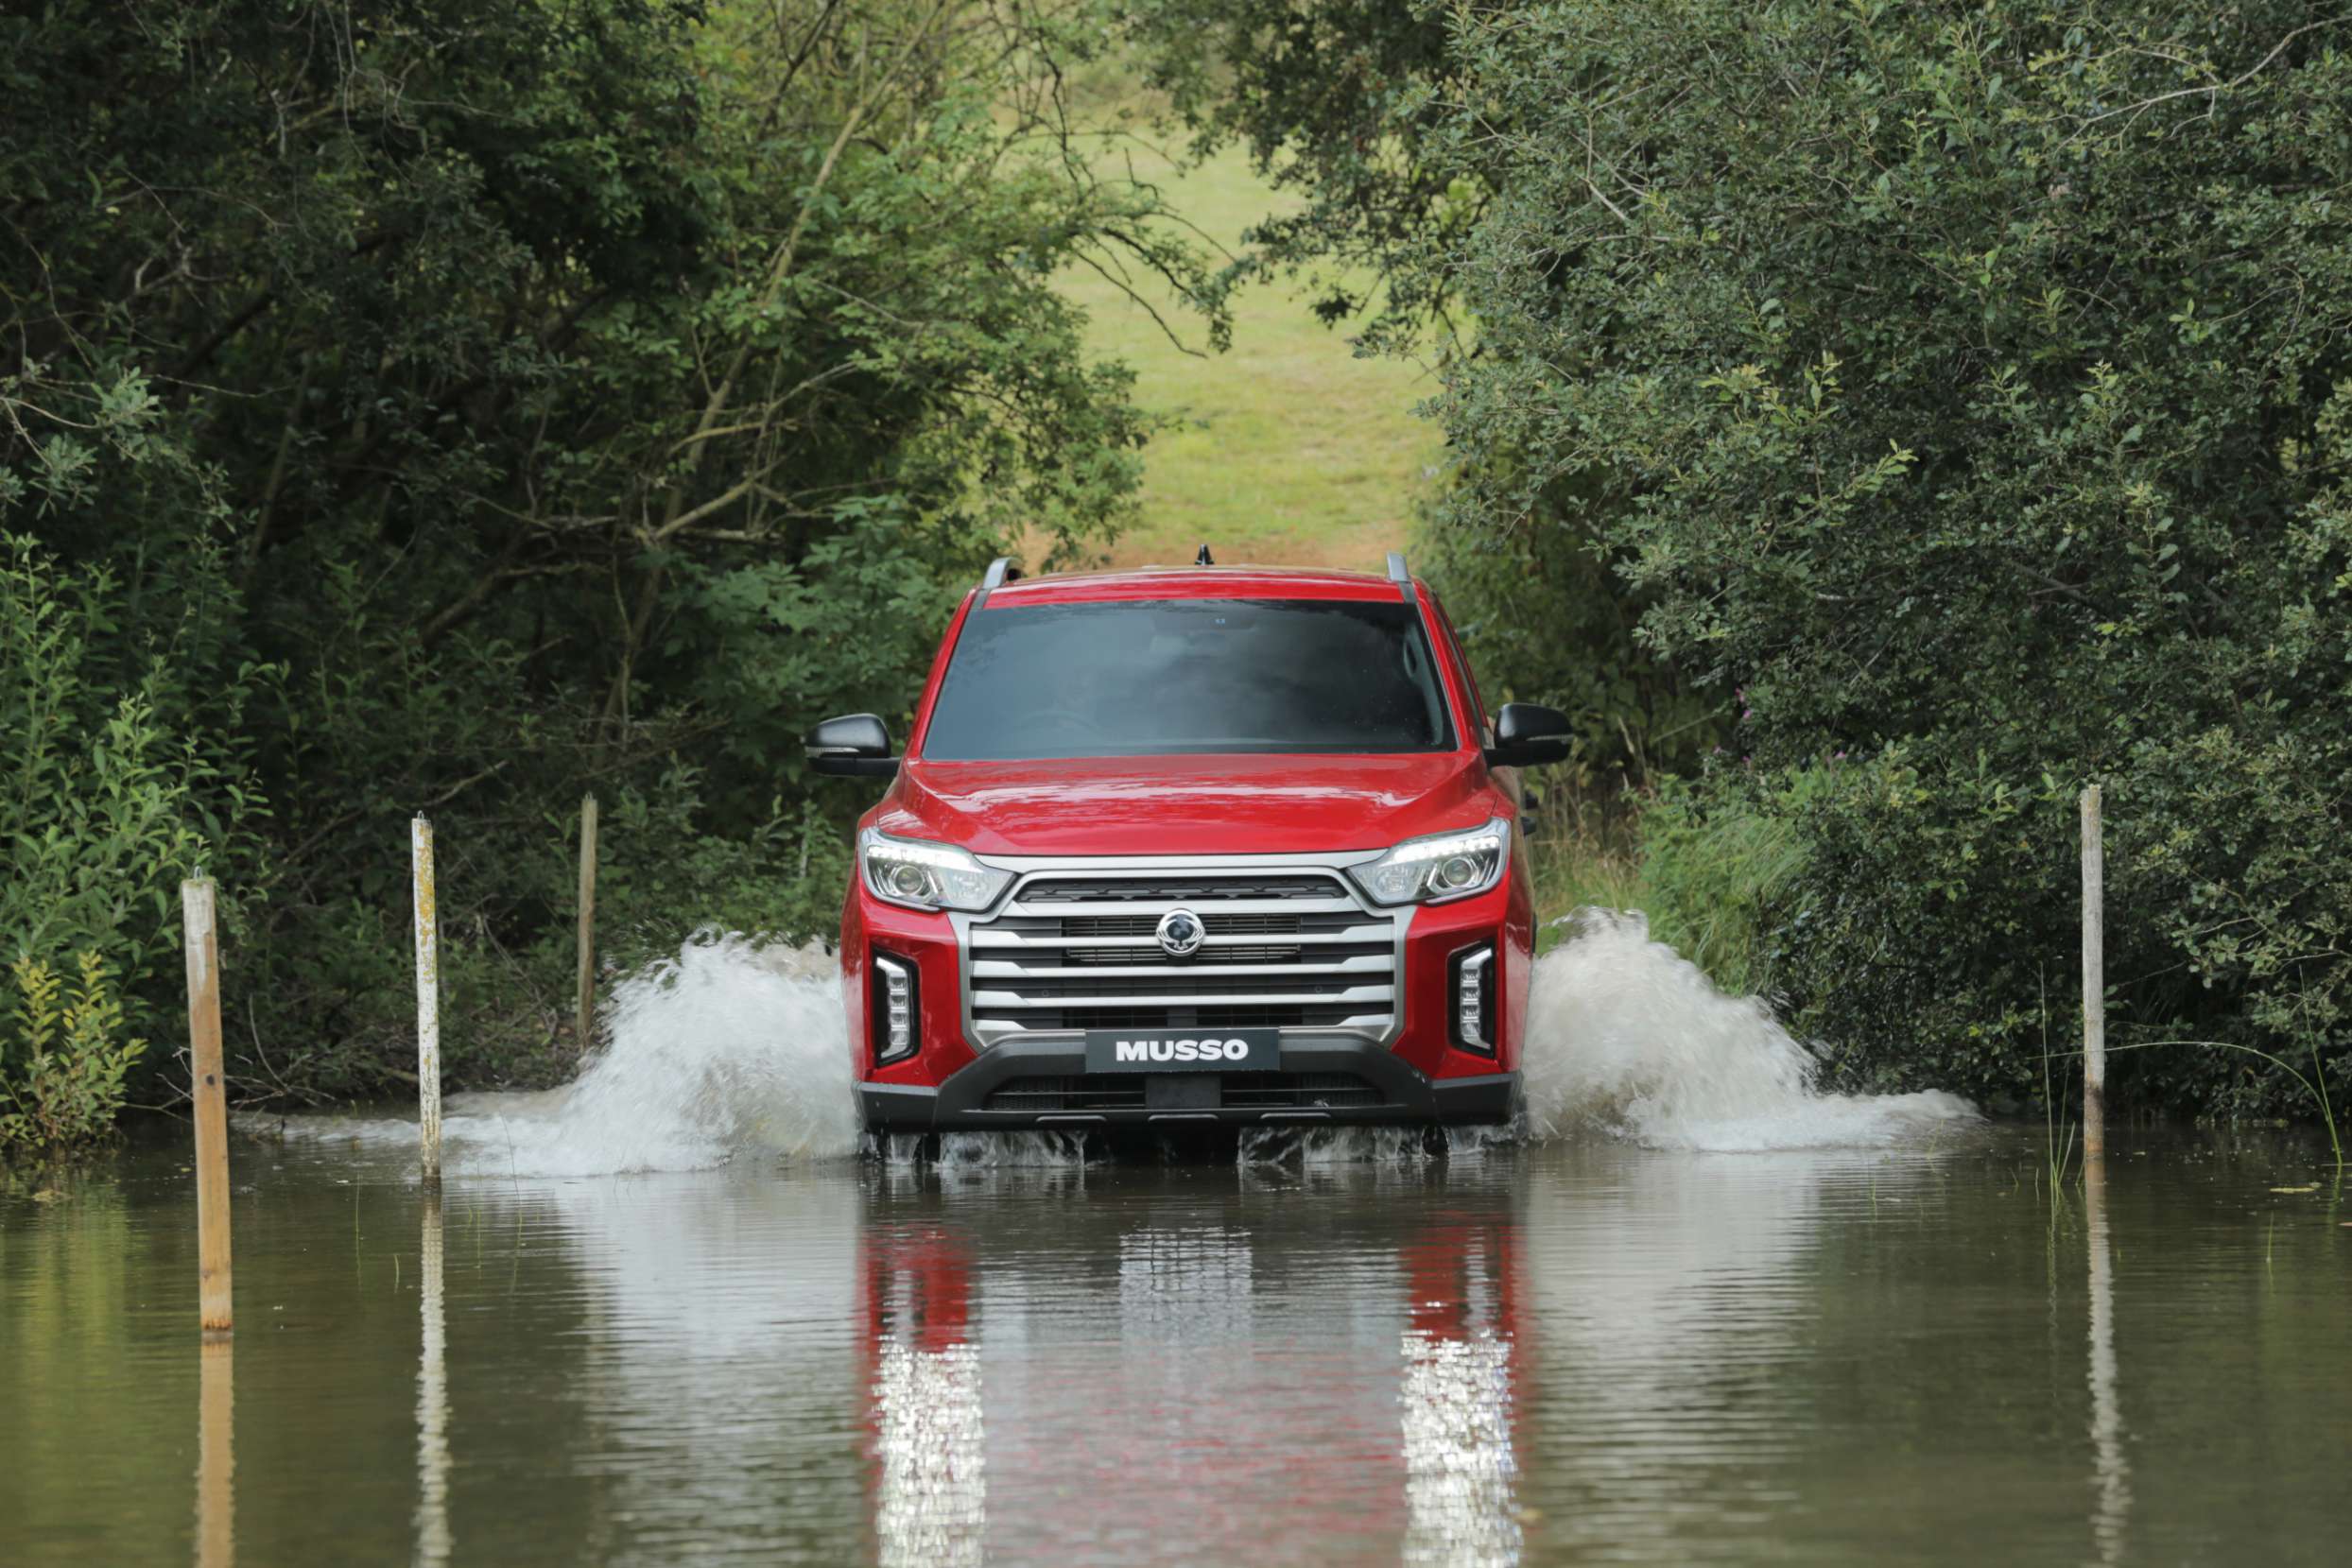 New SsangYong Musso photo shoot - wading